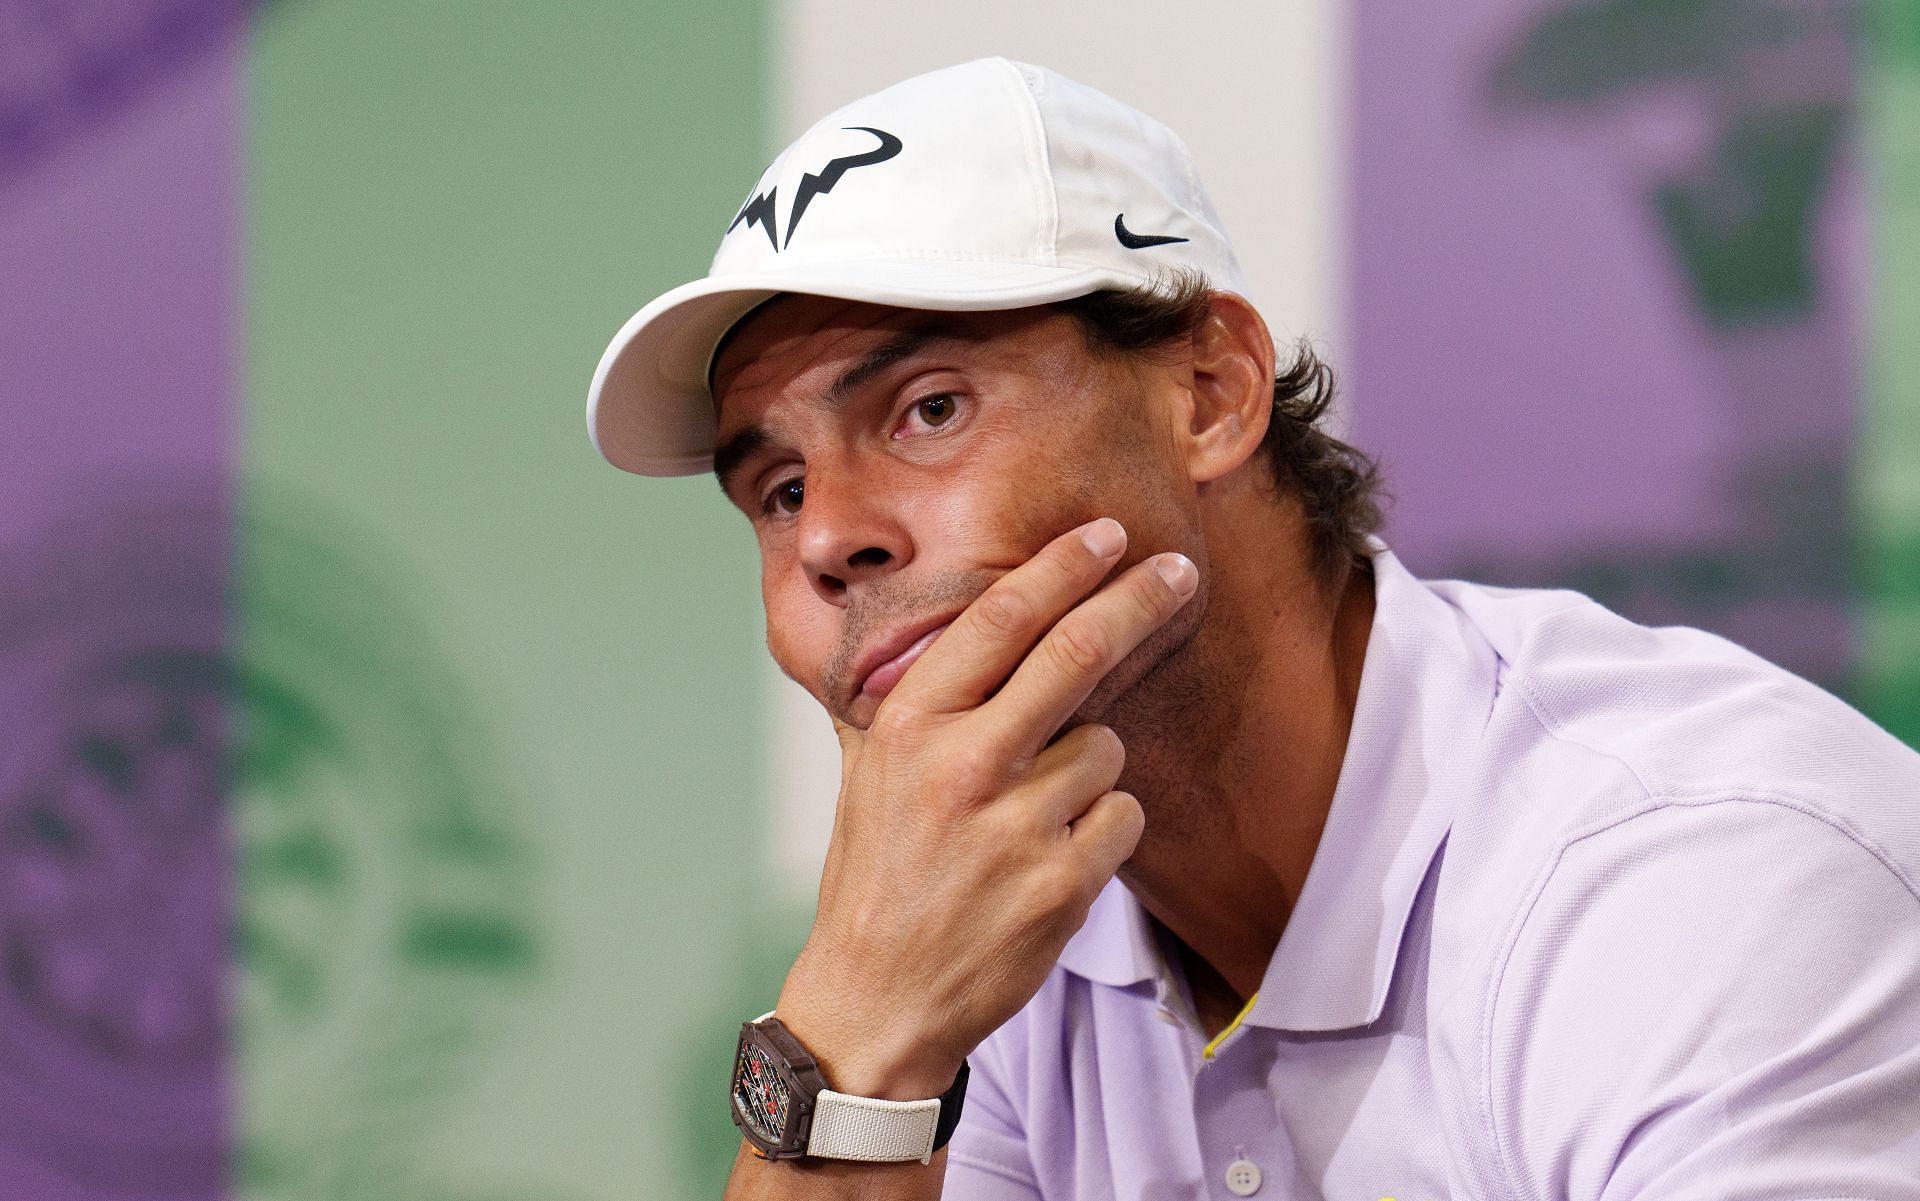 Rafael Nadal during a press conference.